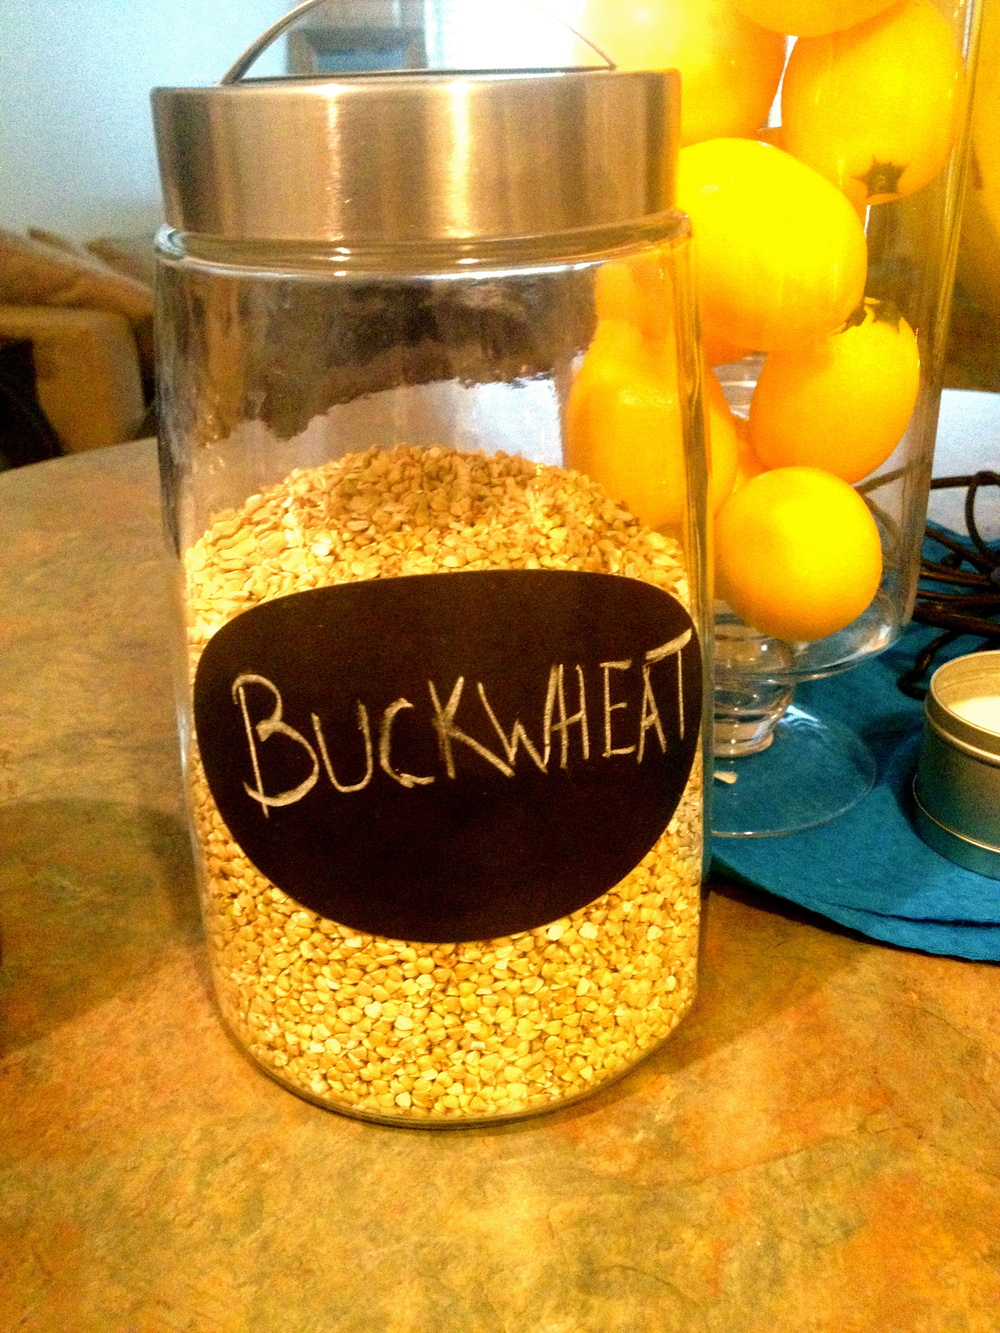 I decided my buckwheat was so important that it deserved its own jar.